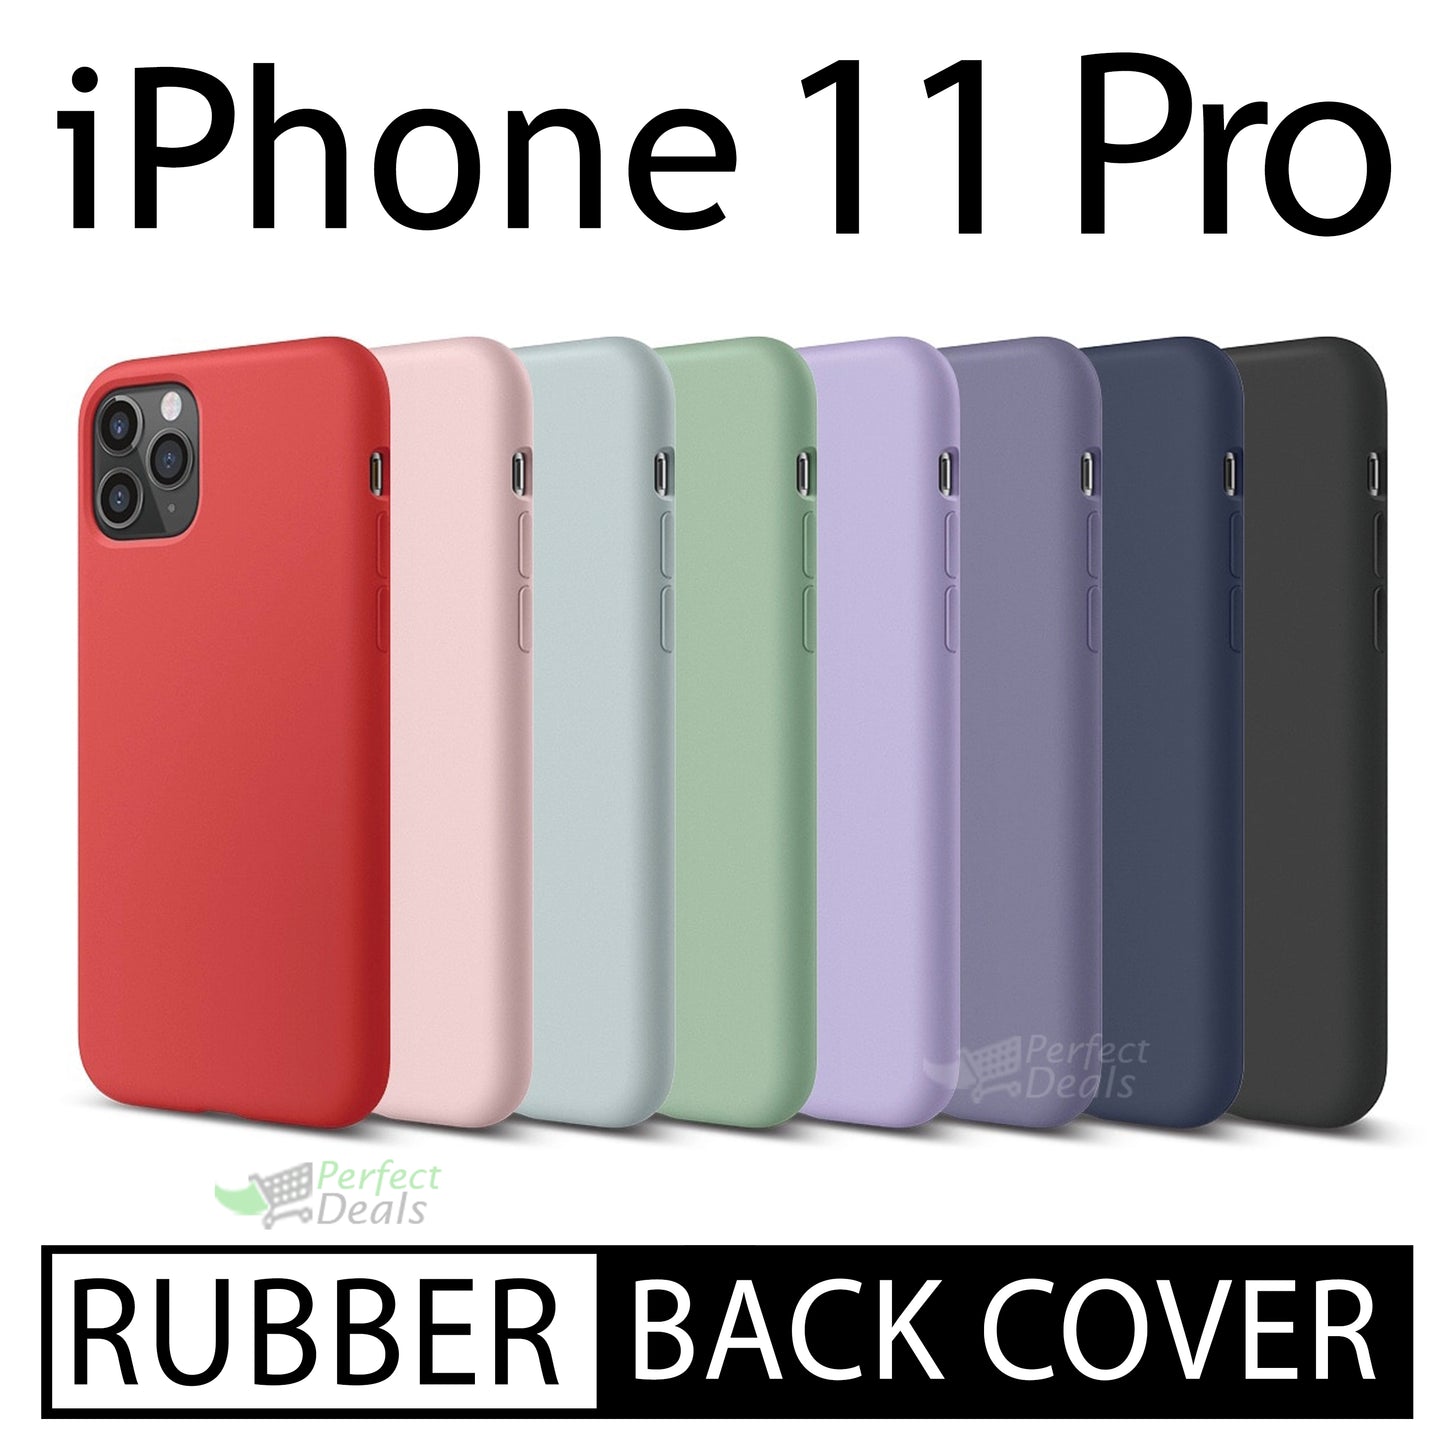 Slim Rubber fit back cover for iPhone 11 Pro